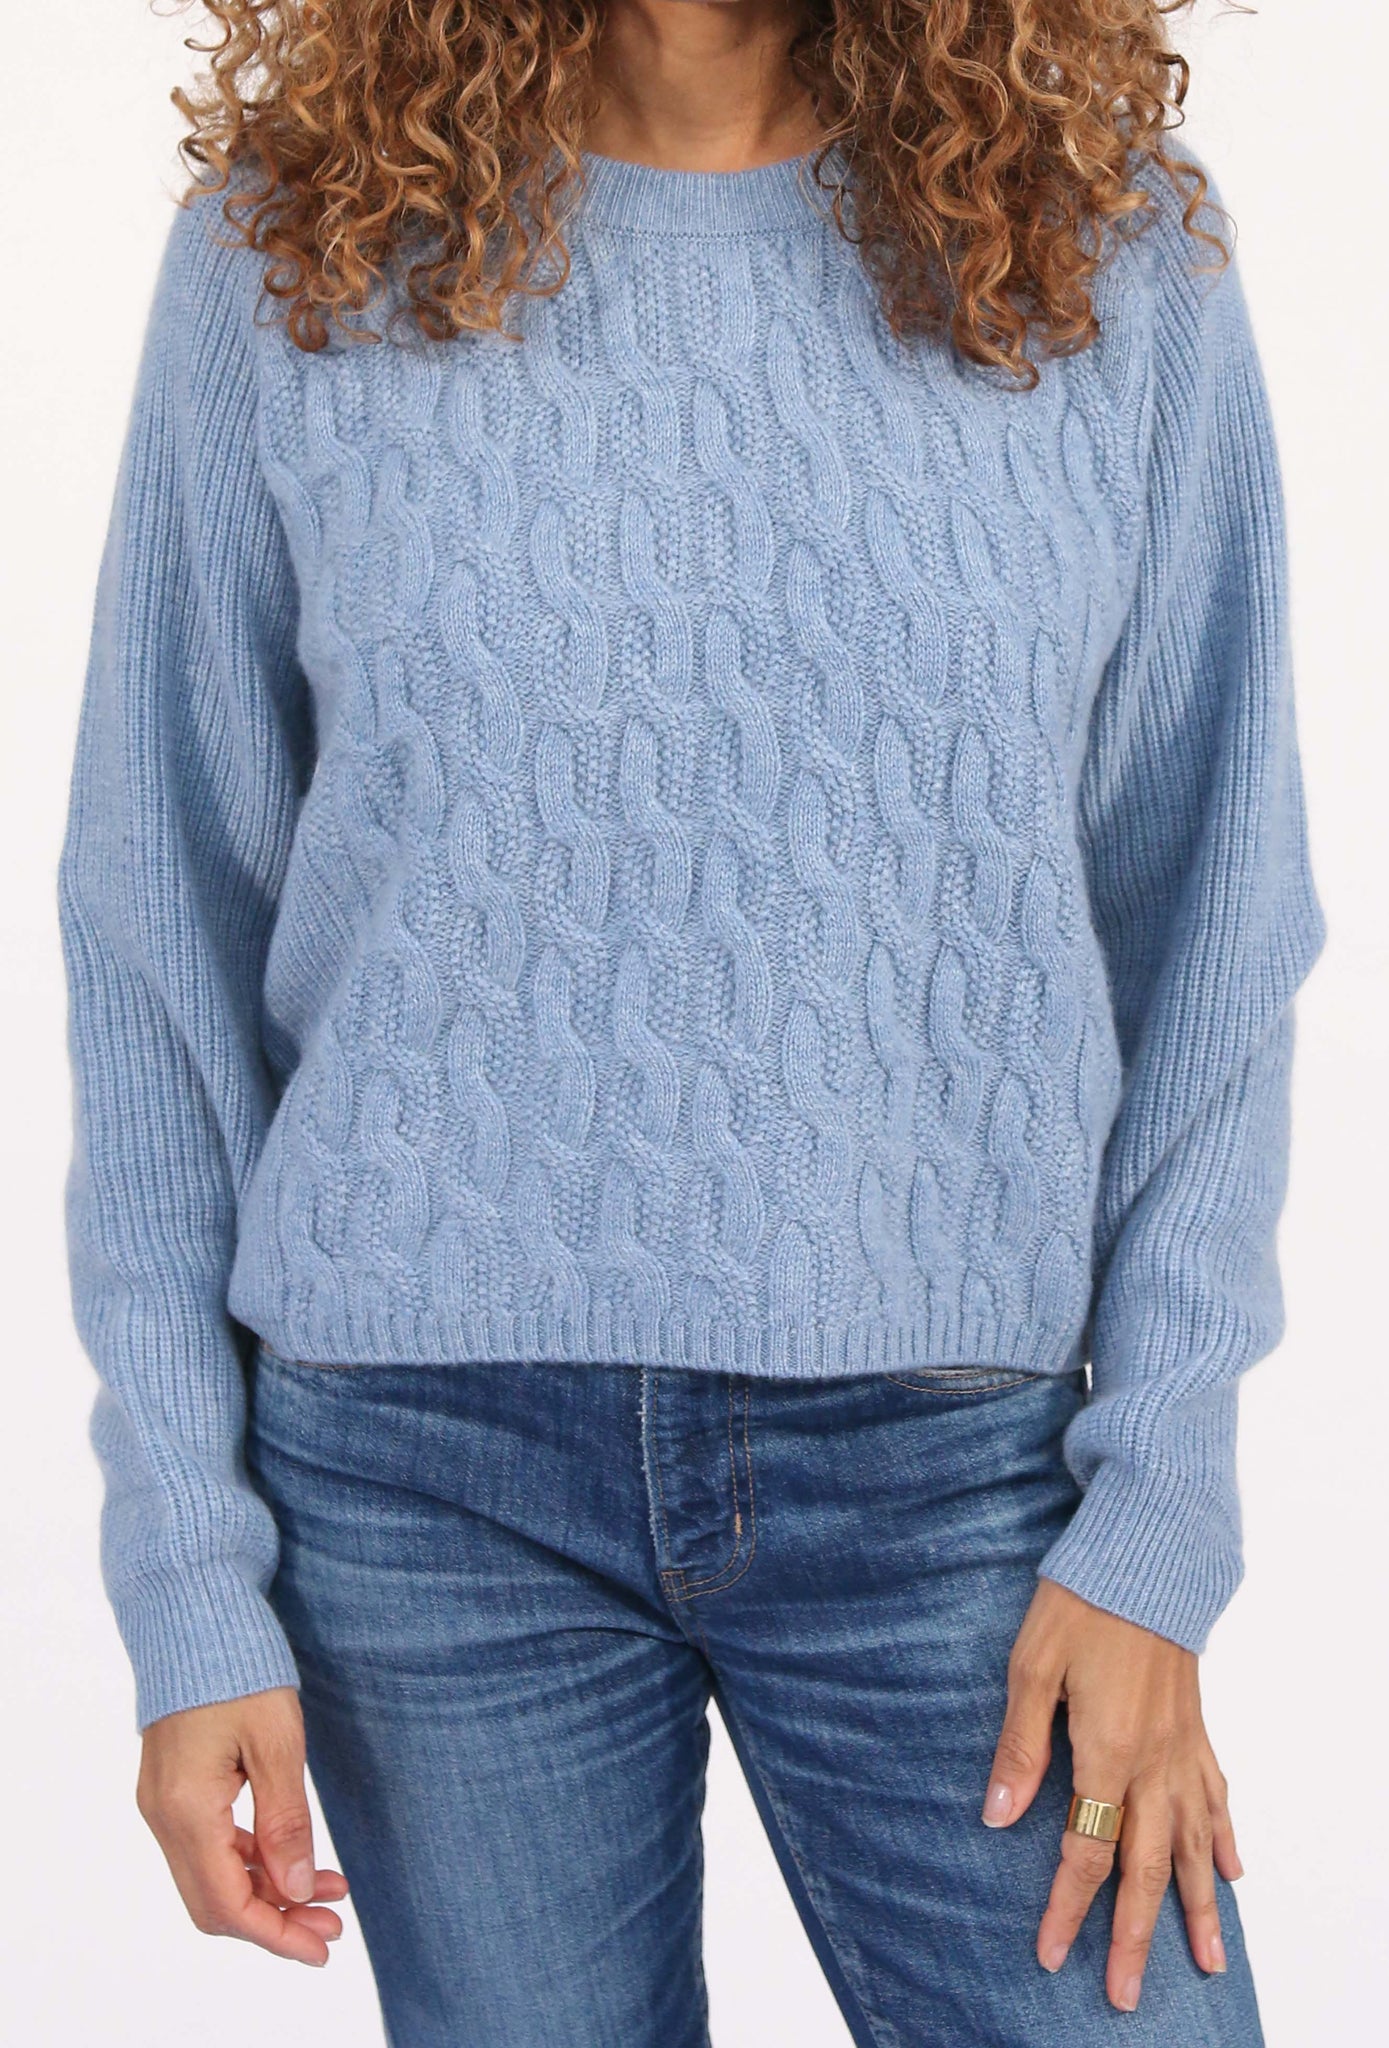 Eden Cashmere Sweater in Chambray